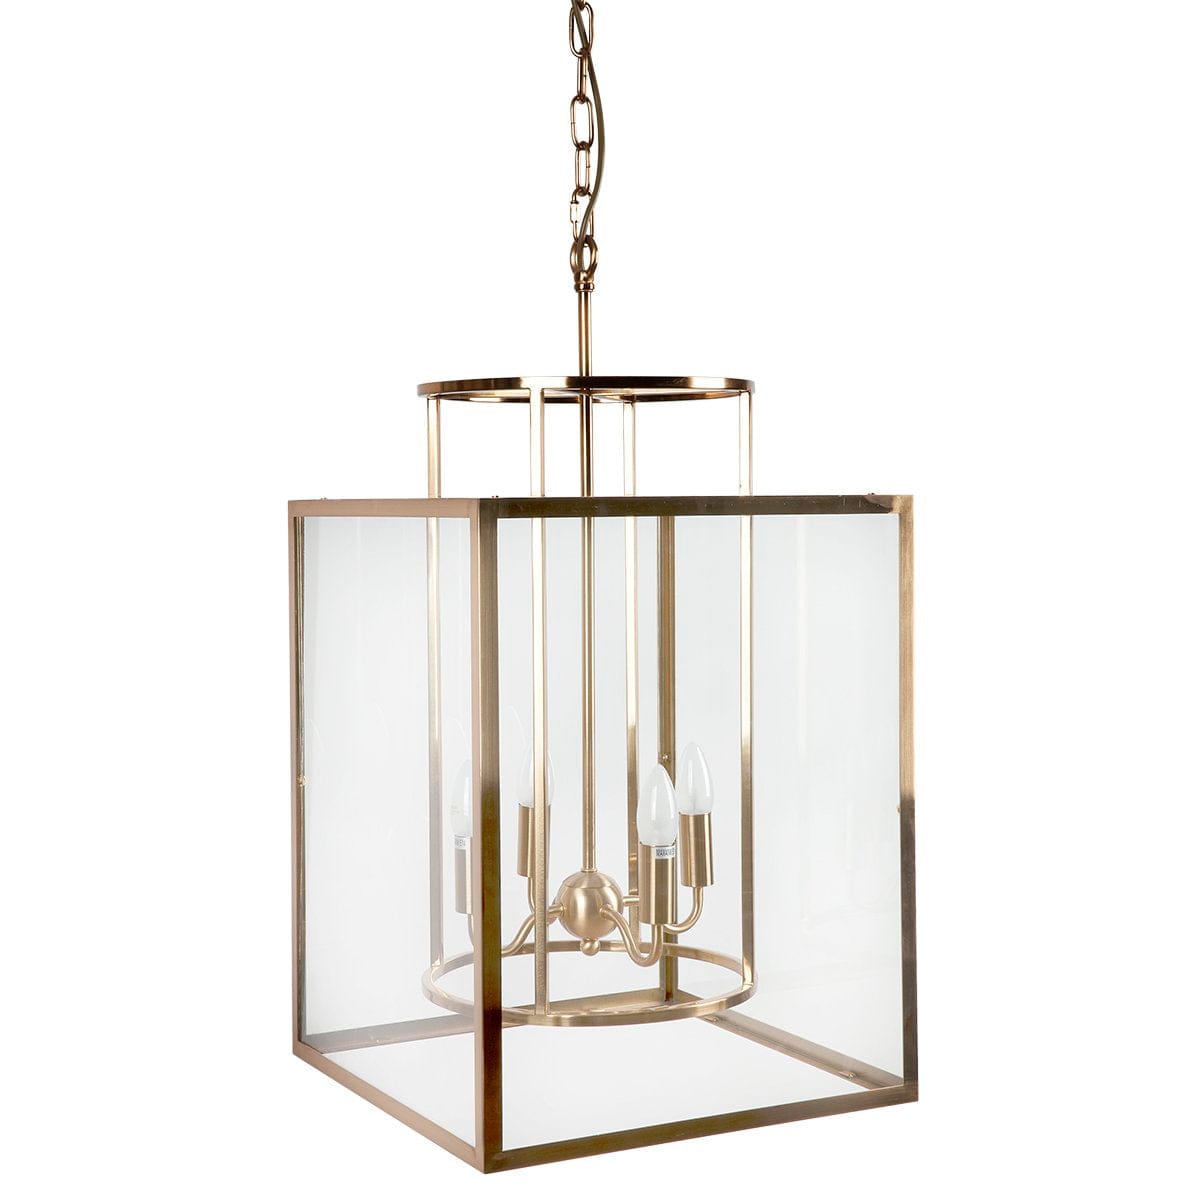 CAFE Lighting & Living Chandeliers CONCORD LARGE Brass Glass Pendant 20712